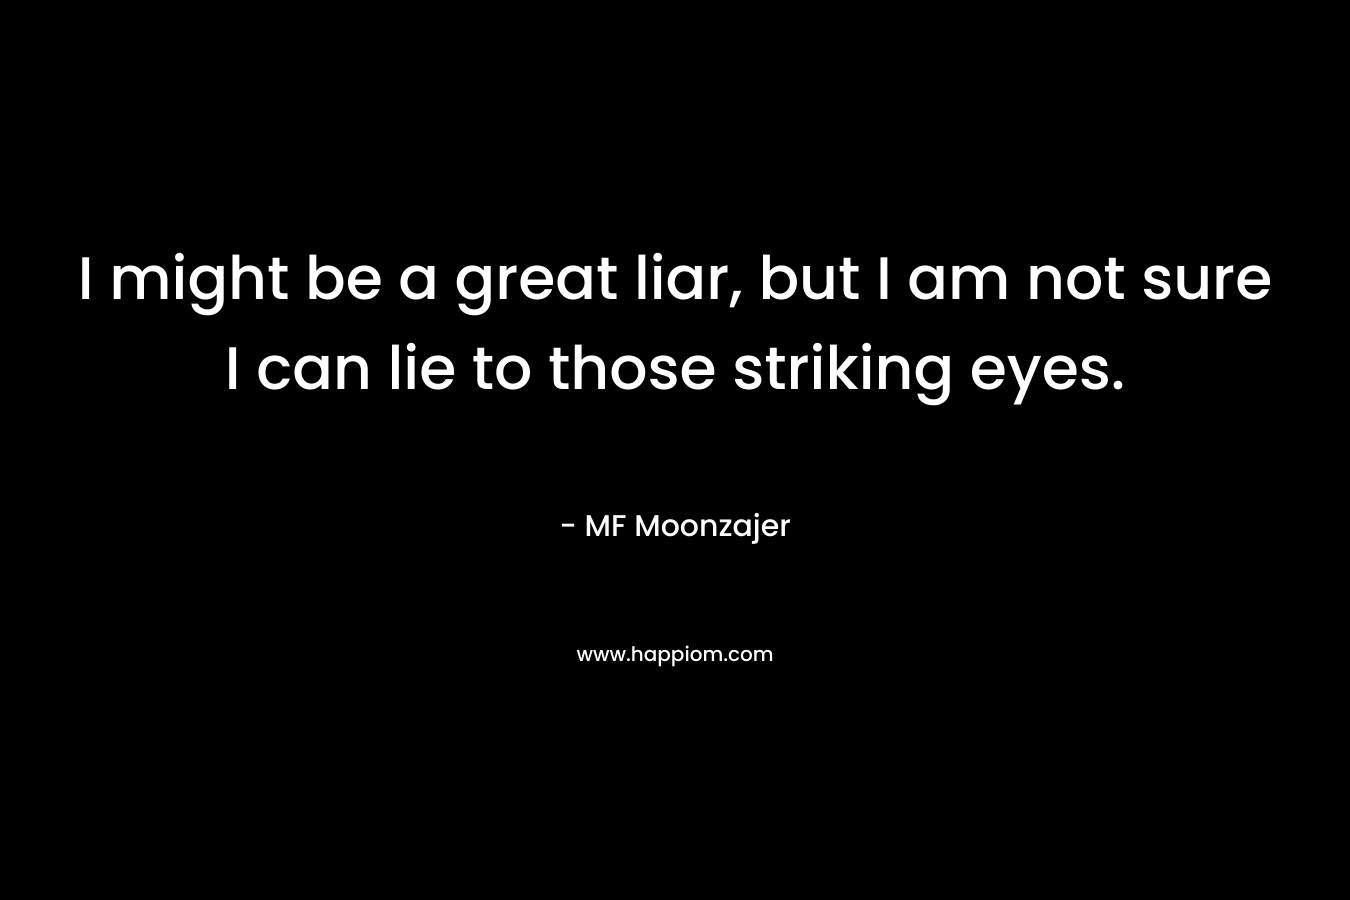 I might be a great liar, but I am not sure I can lie to those striking eyes. – MF Moonzajer